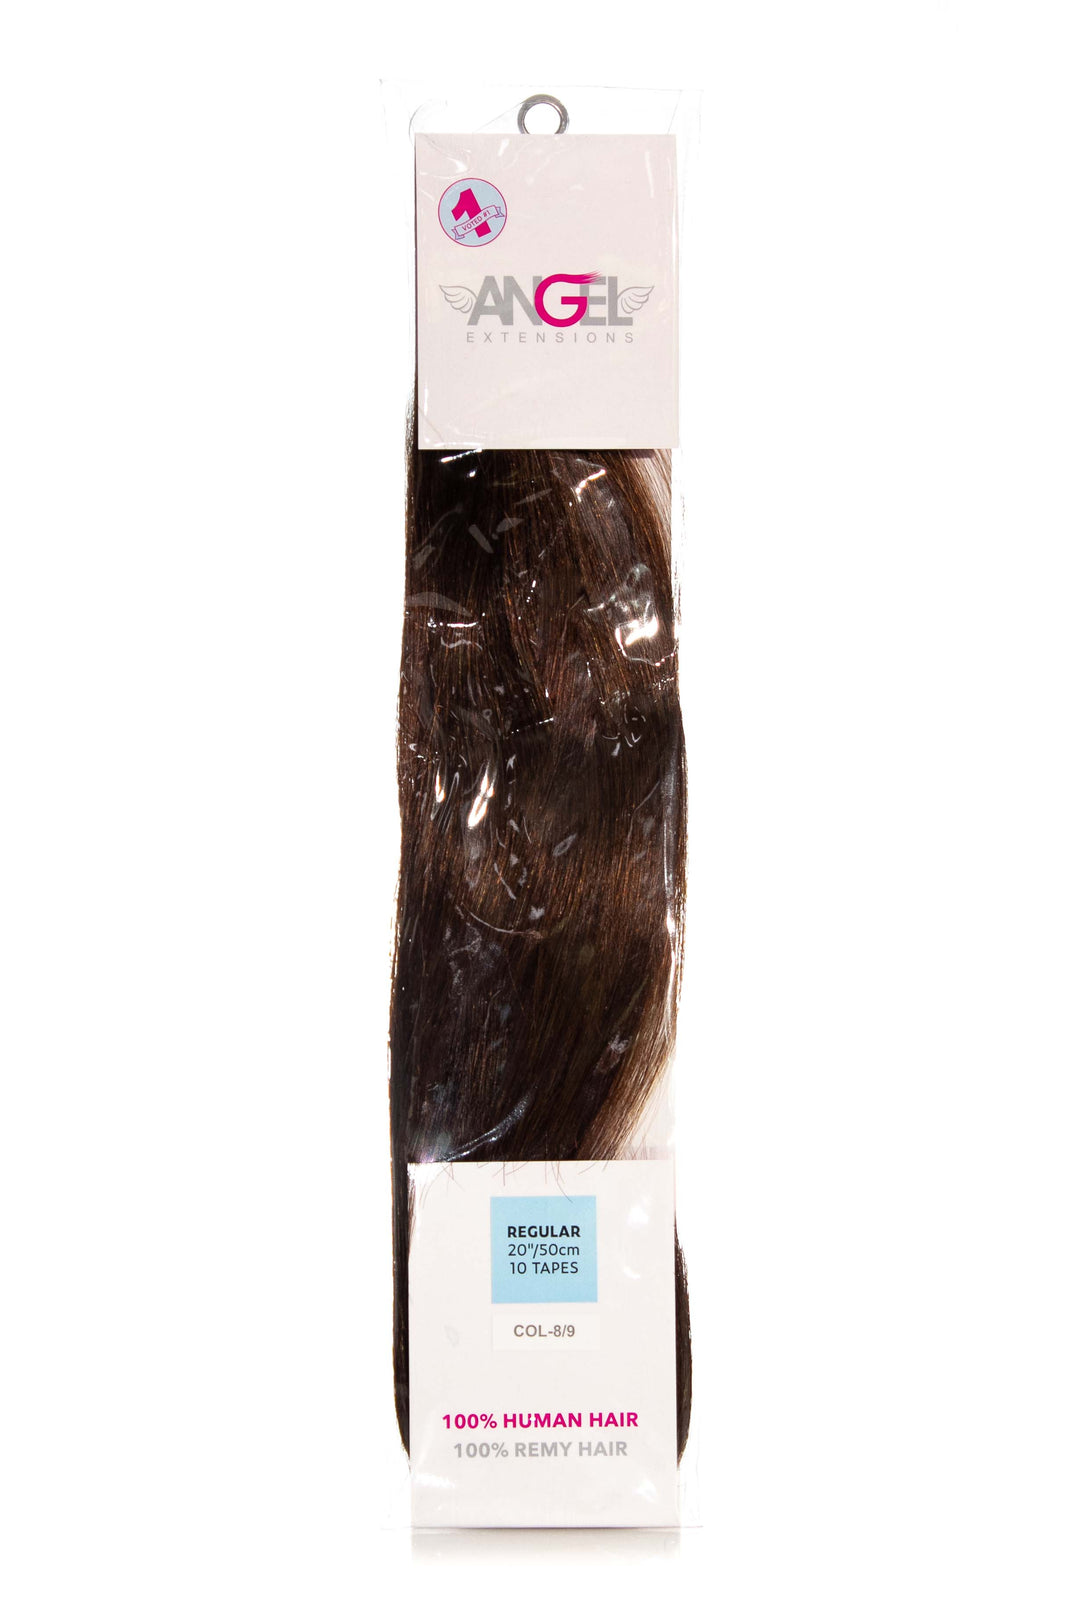 ANGEL EXTENSIONS 20" 10 PIECE TAPES REGULAR #8/9